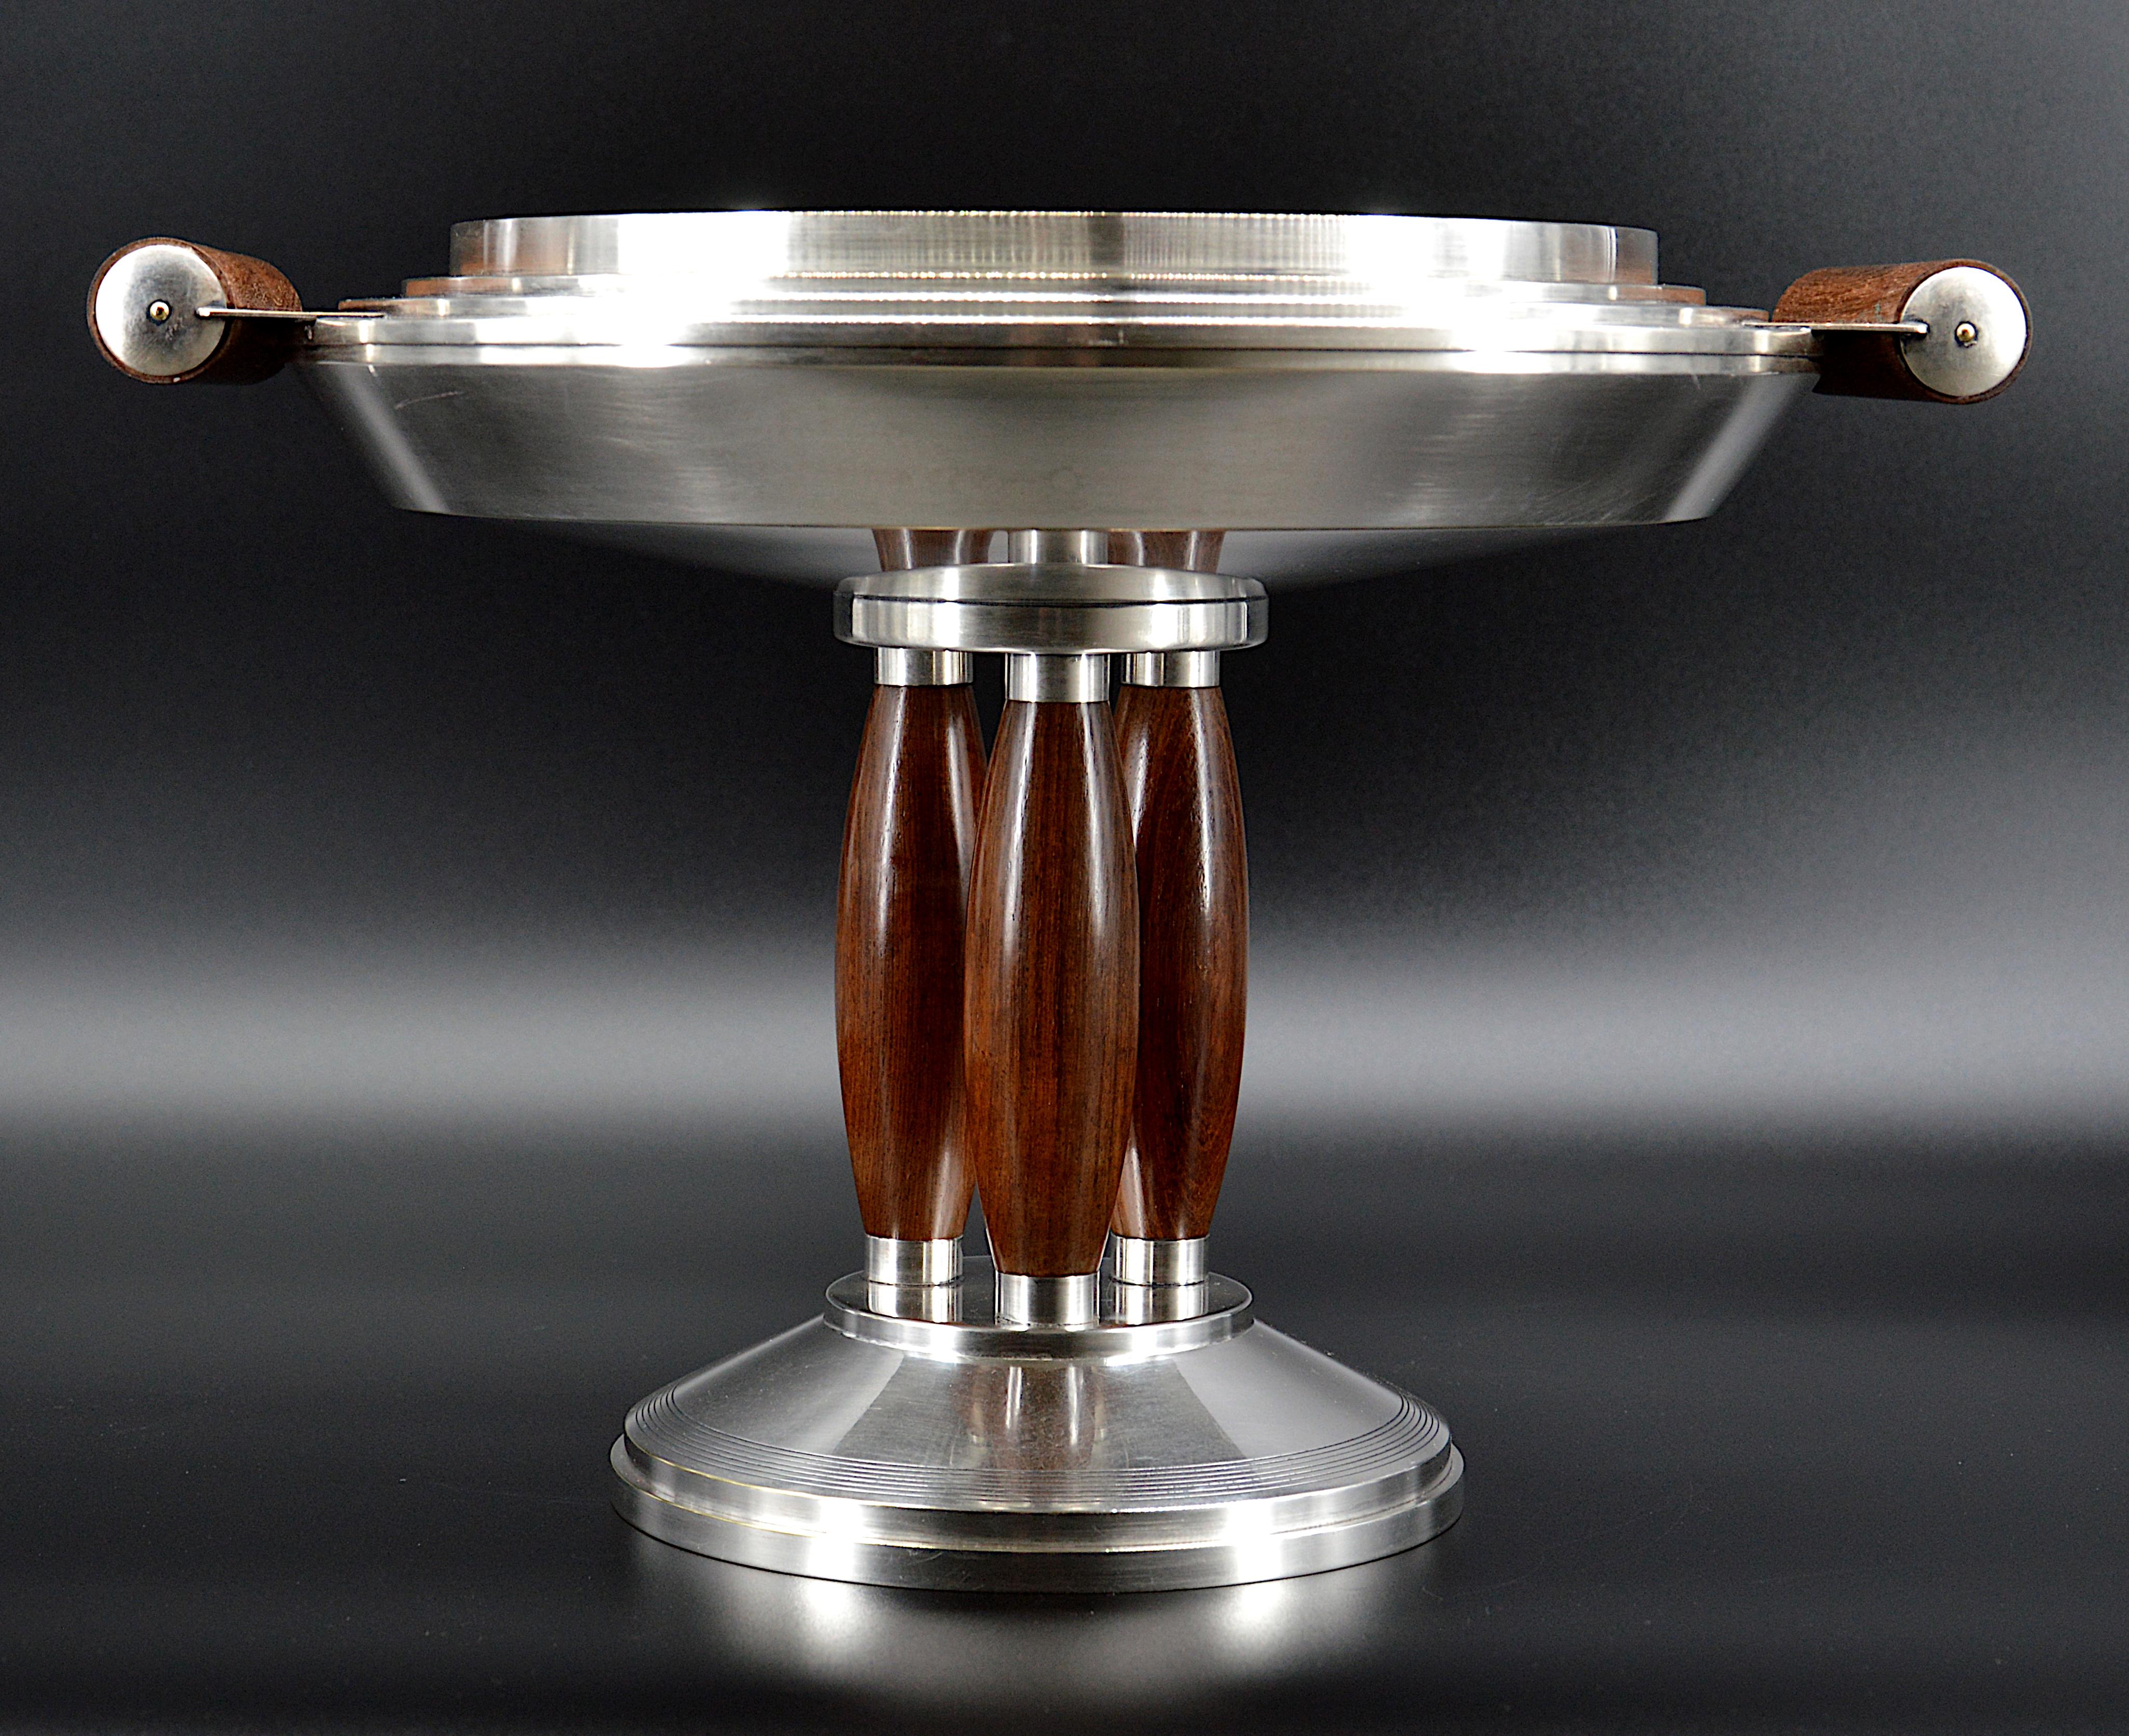 French Art Deco centerpiece by Roux-Marquiand, Lyon,, France, ca.1930. French Art Deco polished silver plate pedestal bowl. Centerpiece or fruit bowl. Art Deco design with three legs and two handles in wood. Round stepped bowl. Height: 11